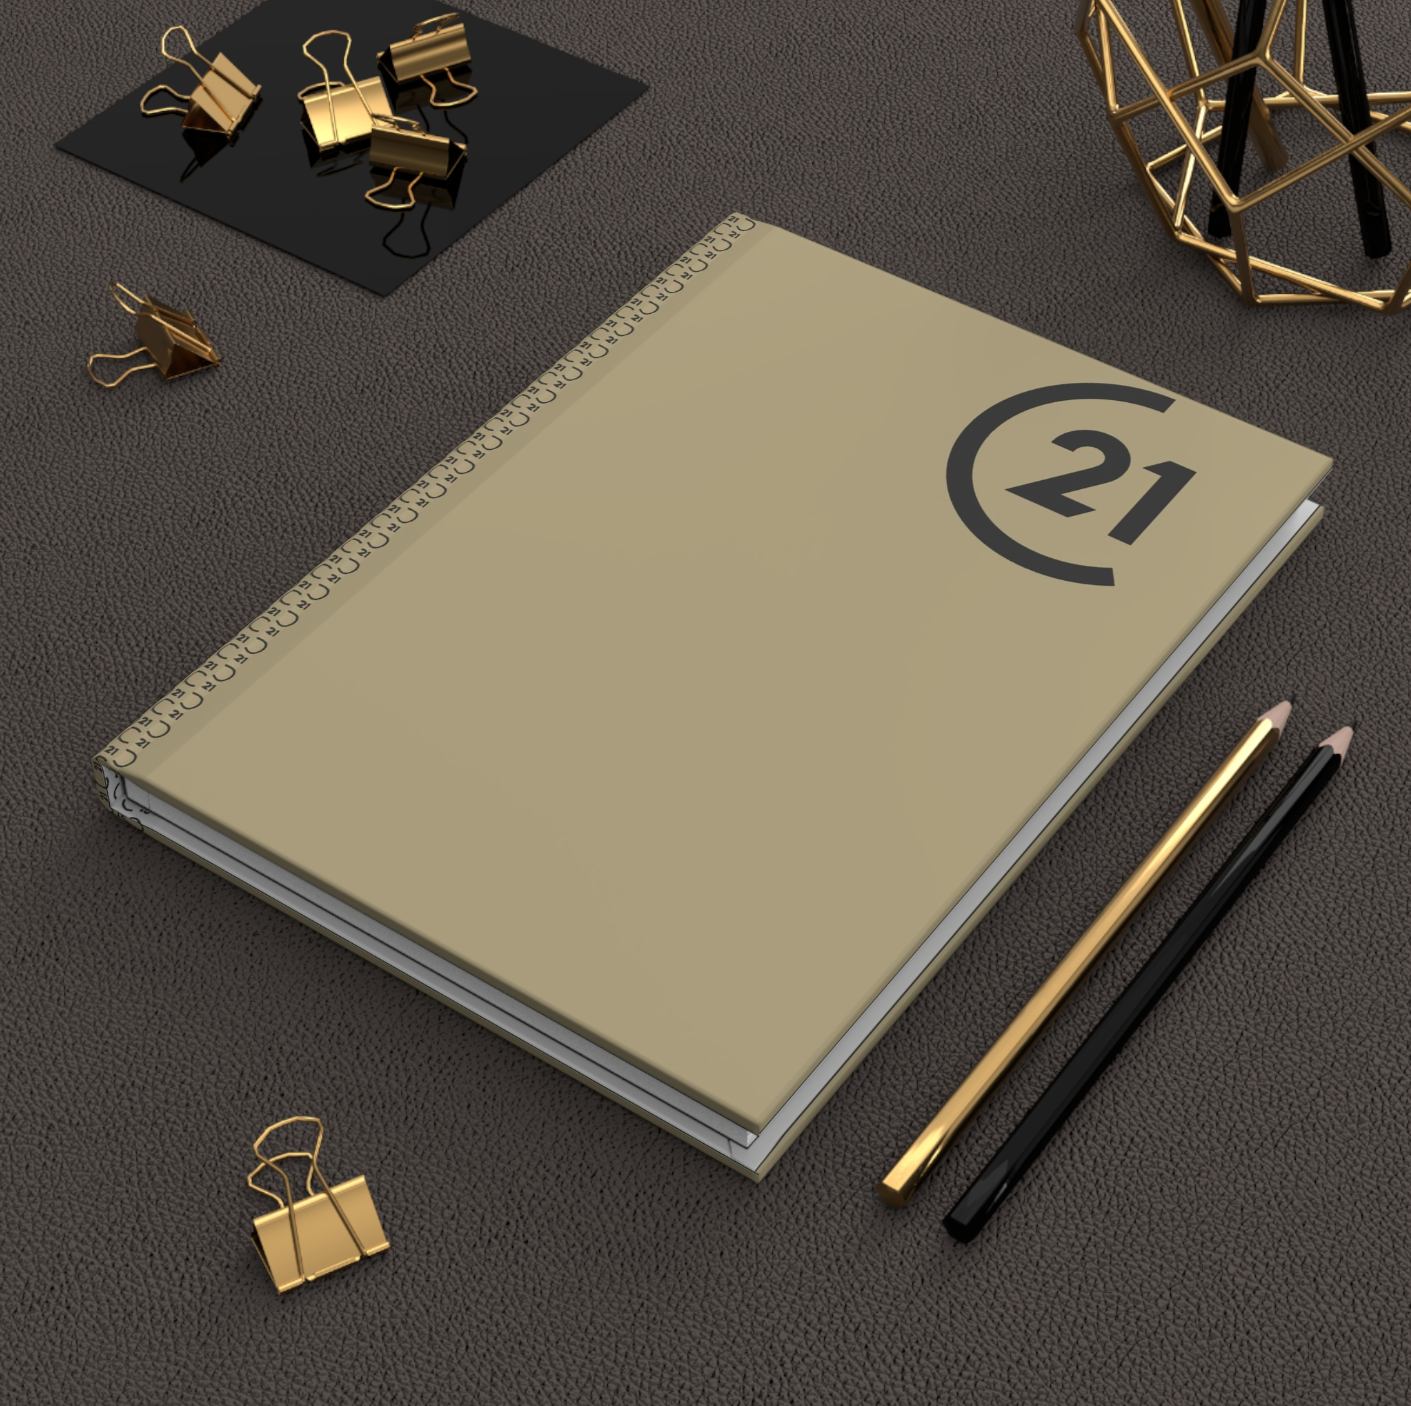 Century 21 Full Color Hardcover Binders Hazelnut Monogram (from as low as $10.46 per cover)